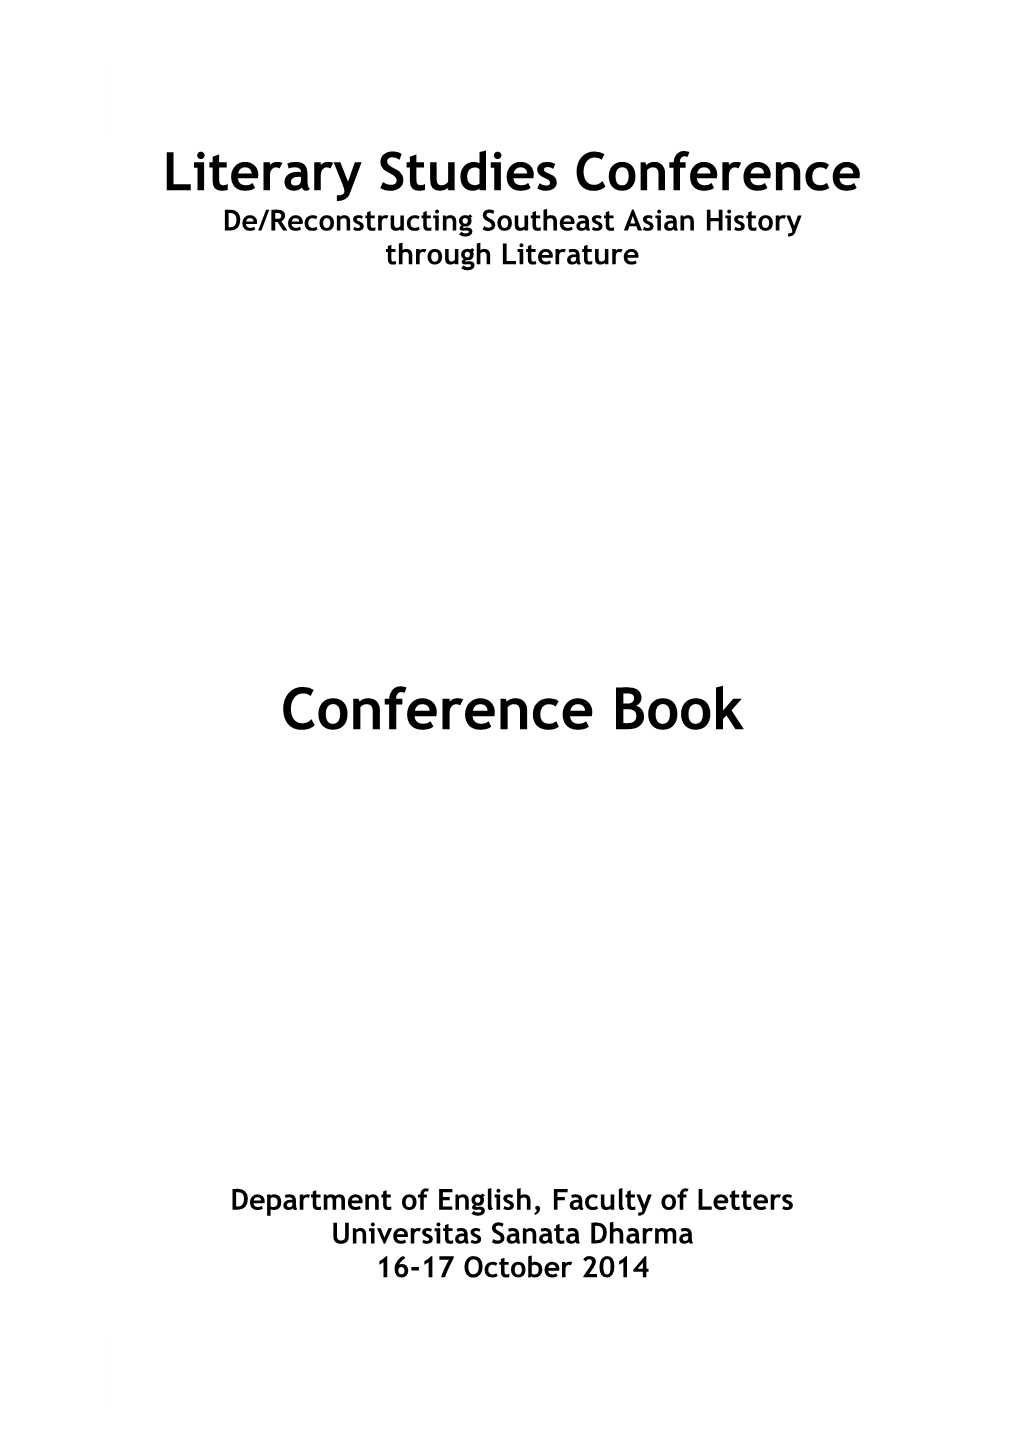 Conference Book